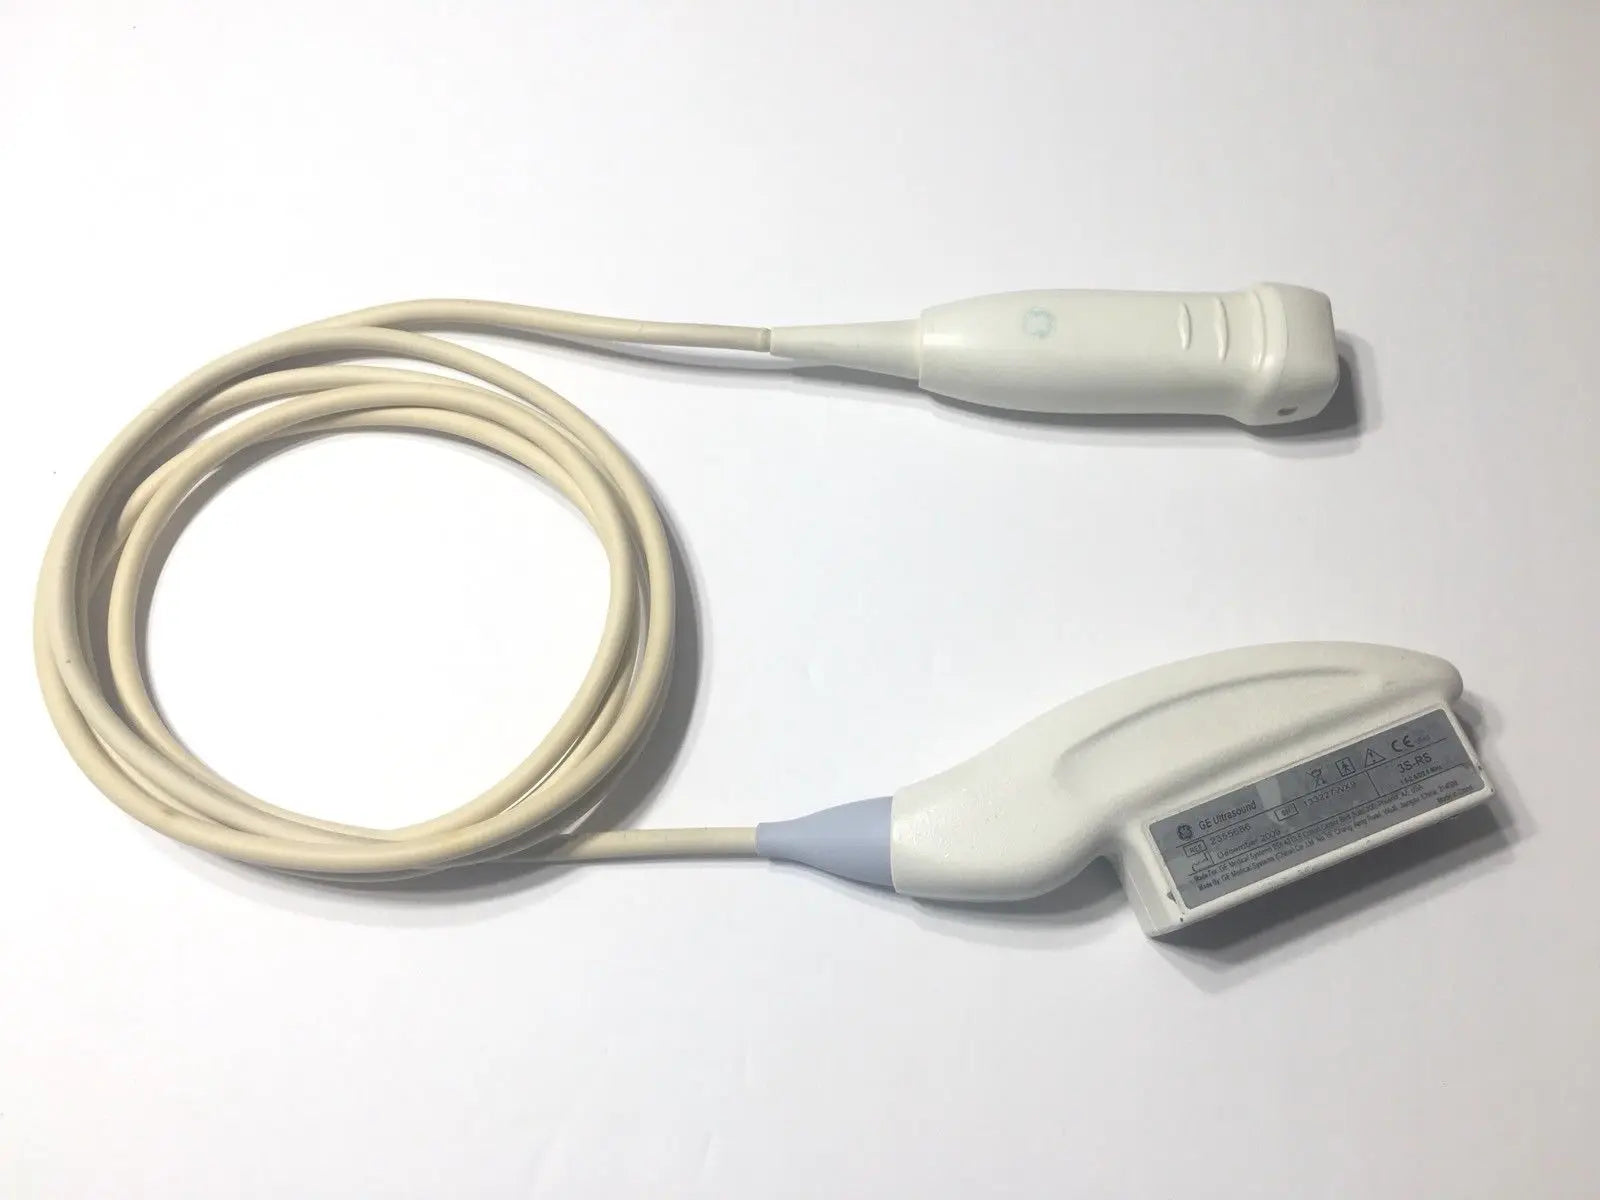 GE 3S-RS ULTRASOUND PROBE/TRANSDUCER REF# 2355686 DIAGNOSTIC ULTRASOUND MACHINES FOR SALE